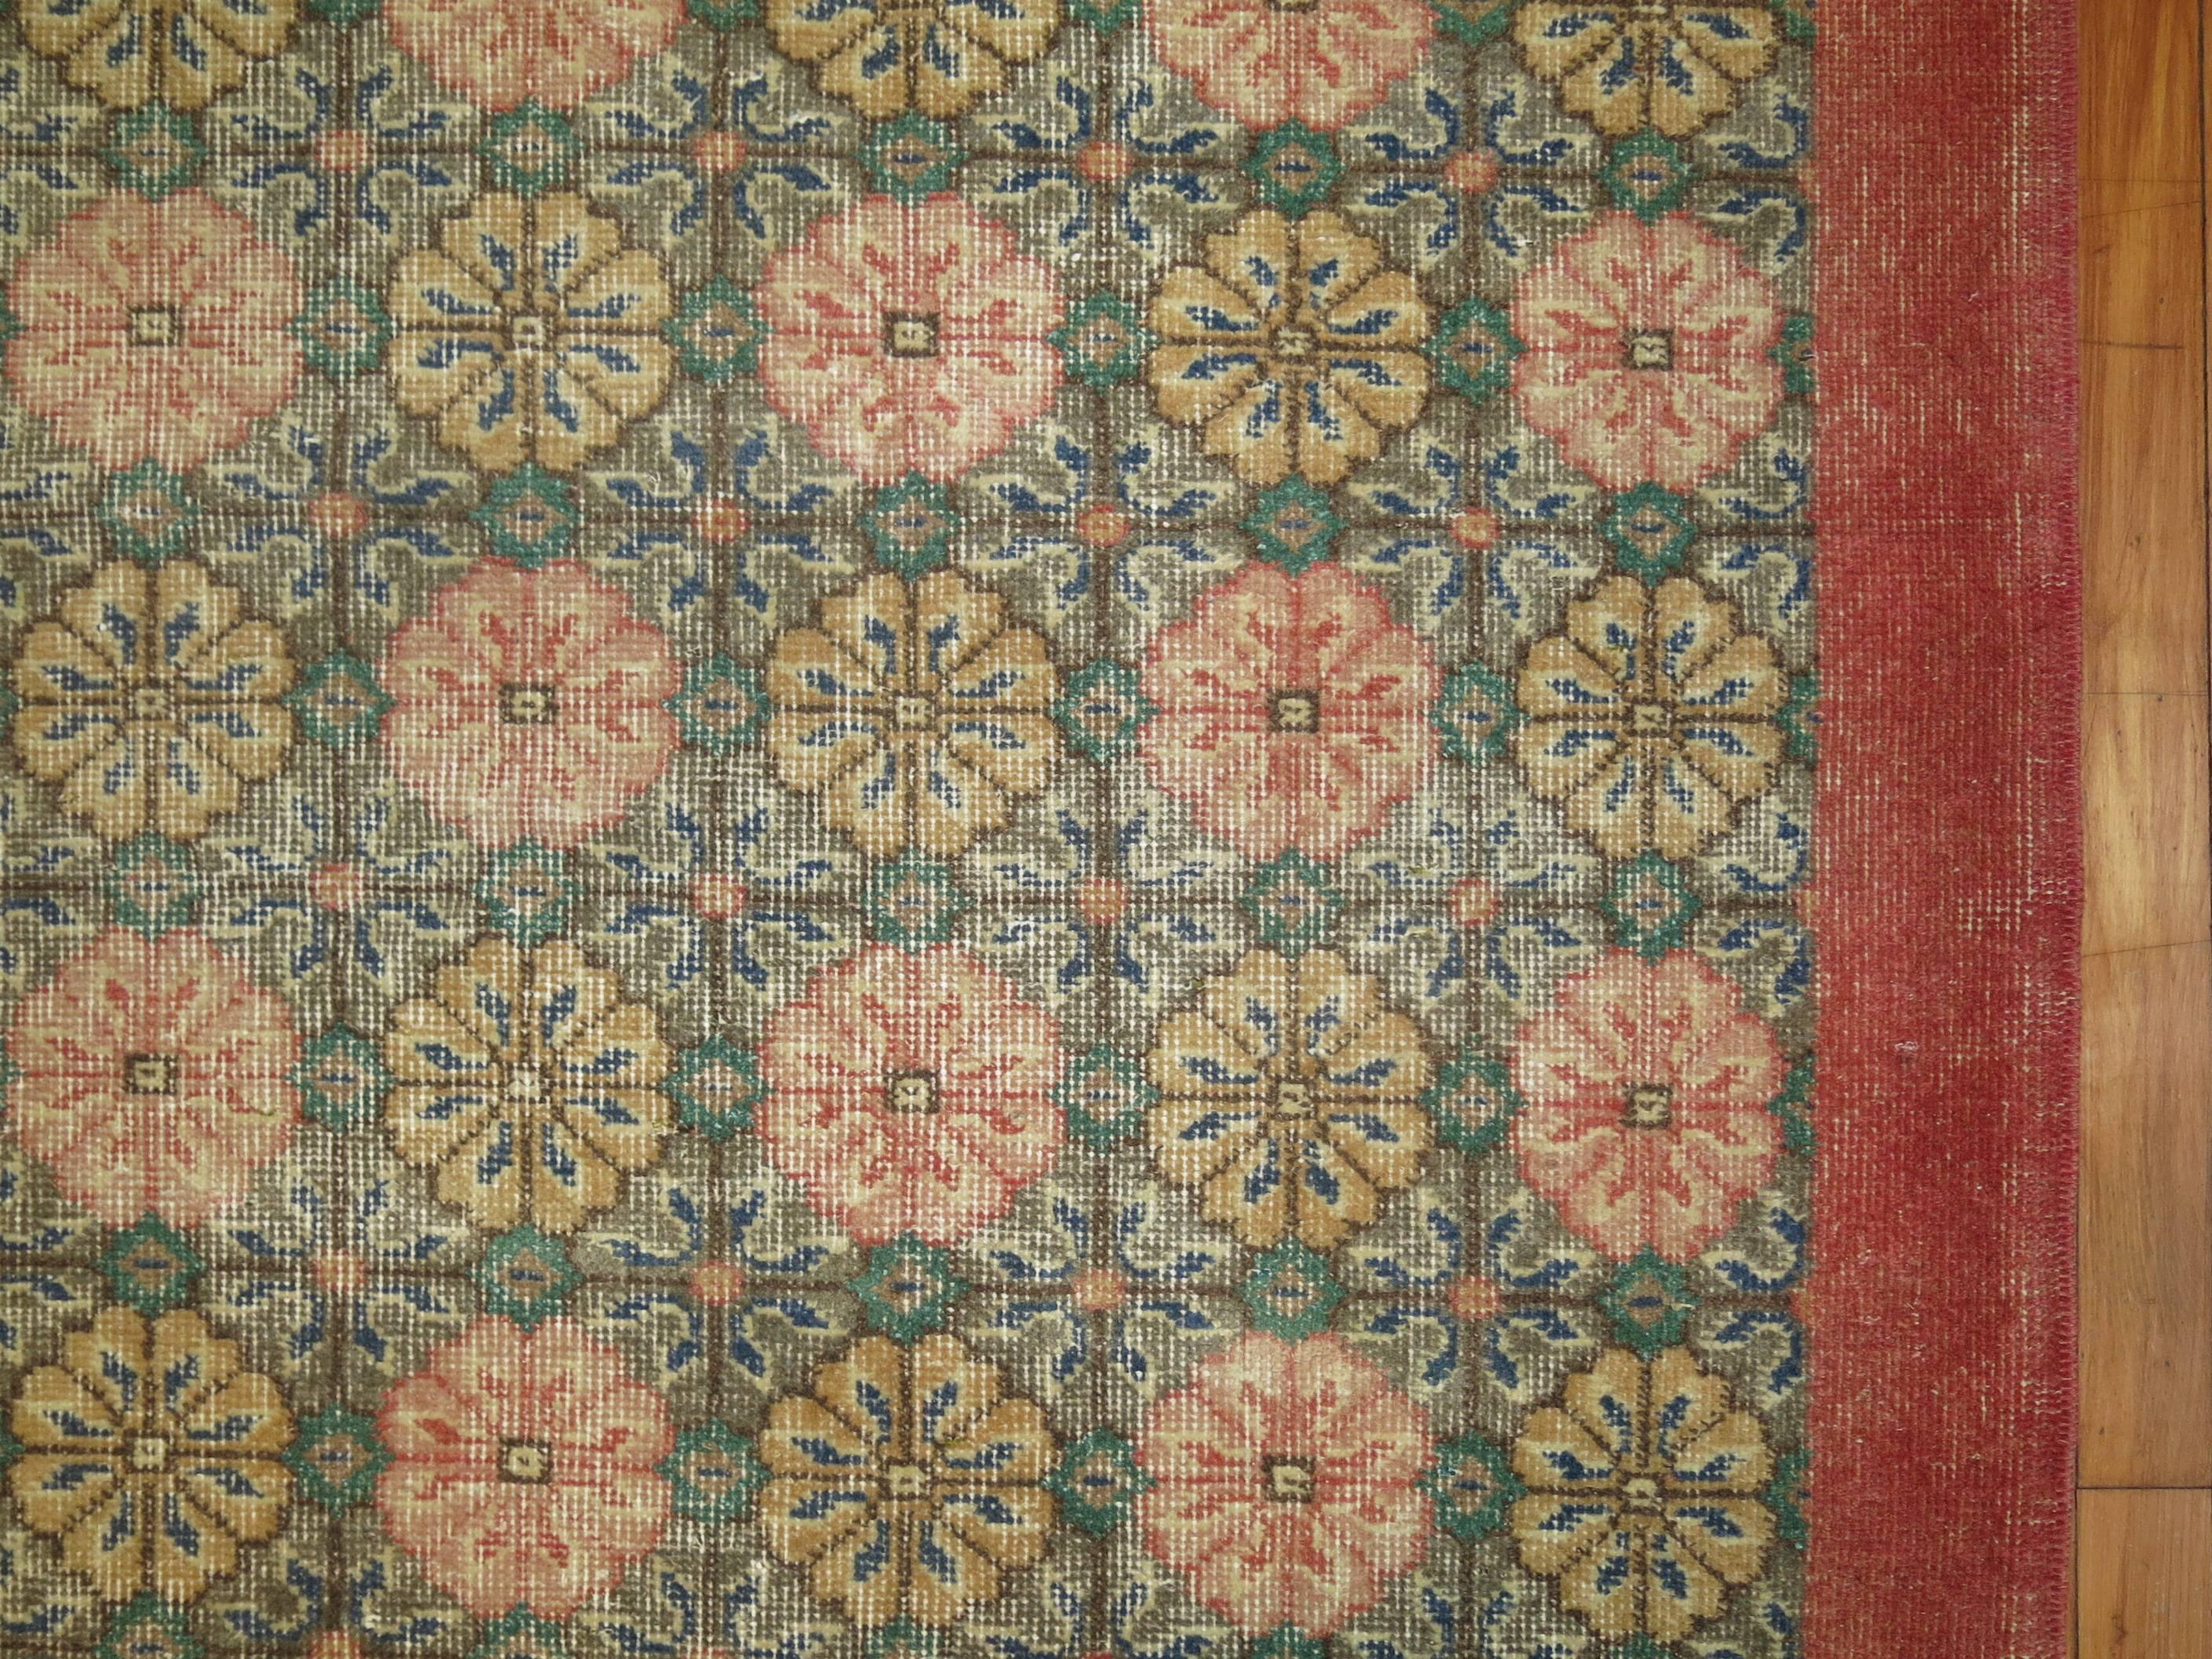 Turkish deco style rug with an all-over floral design with a feminine feel from the middle of the 20th century

5'5'' x 9'1''